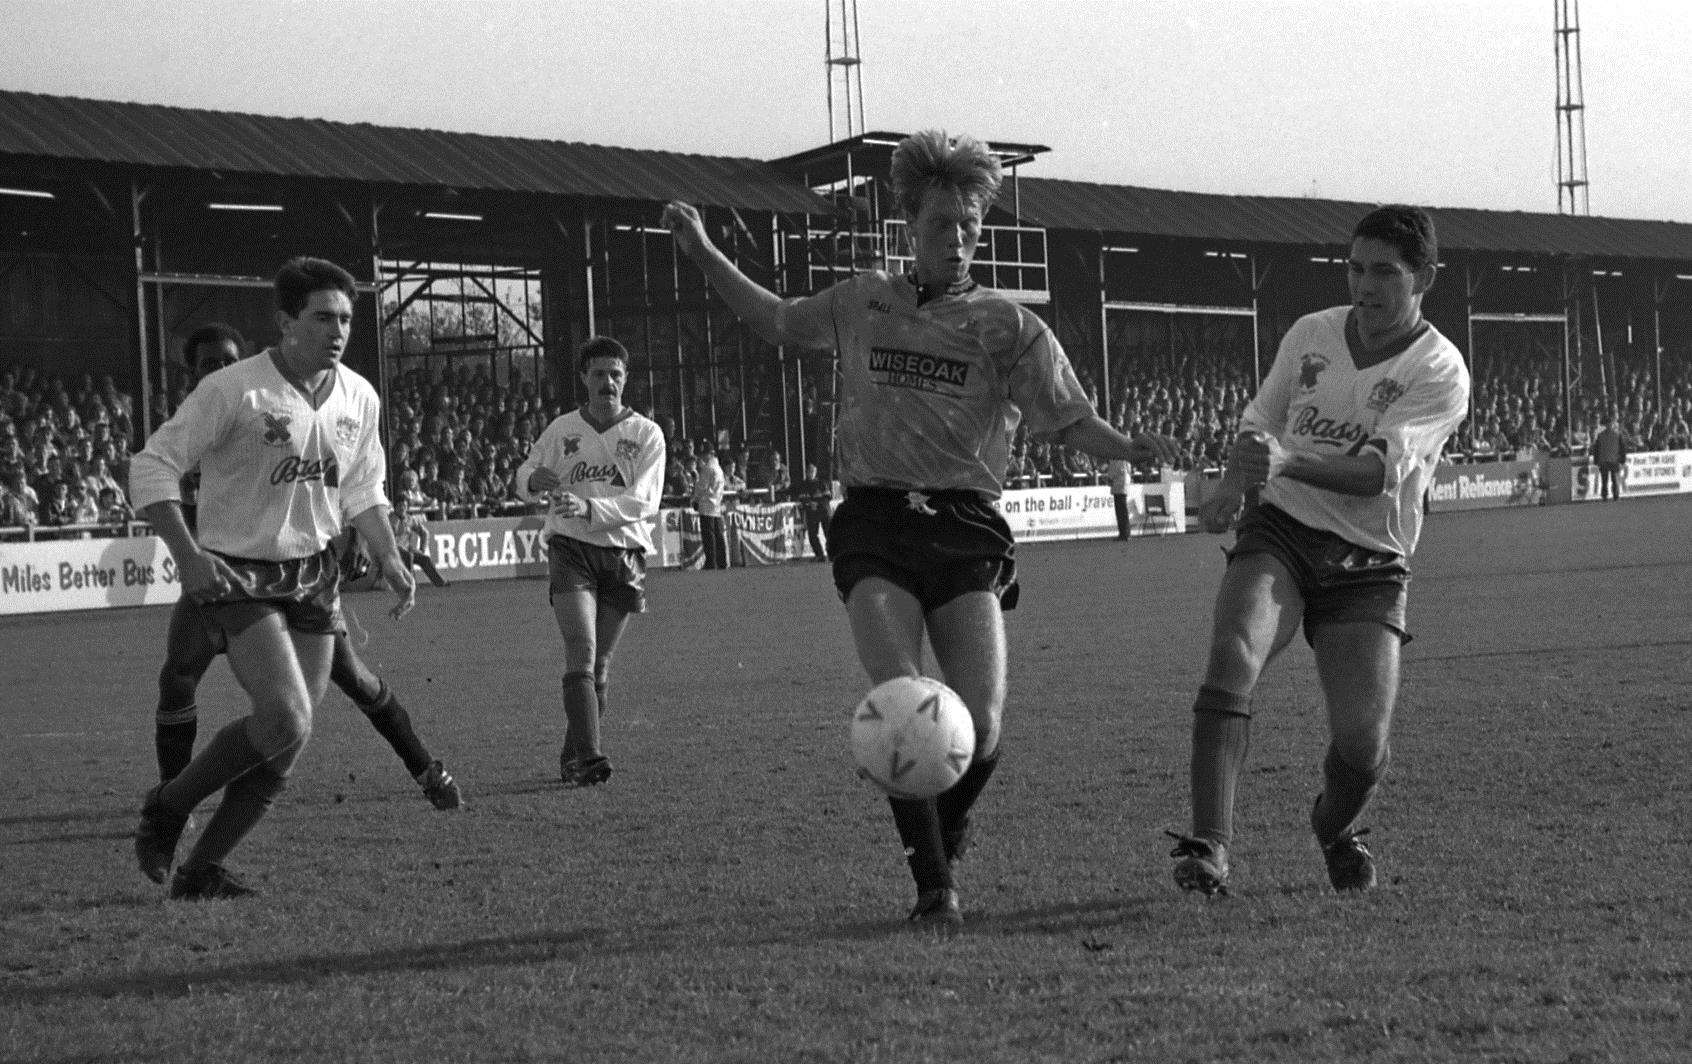 Maidstone United at Dartford's Watling Street ground for an FA Cup match in 1989